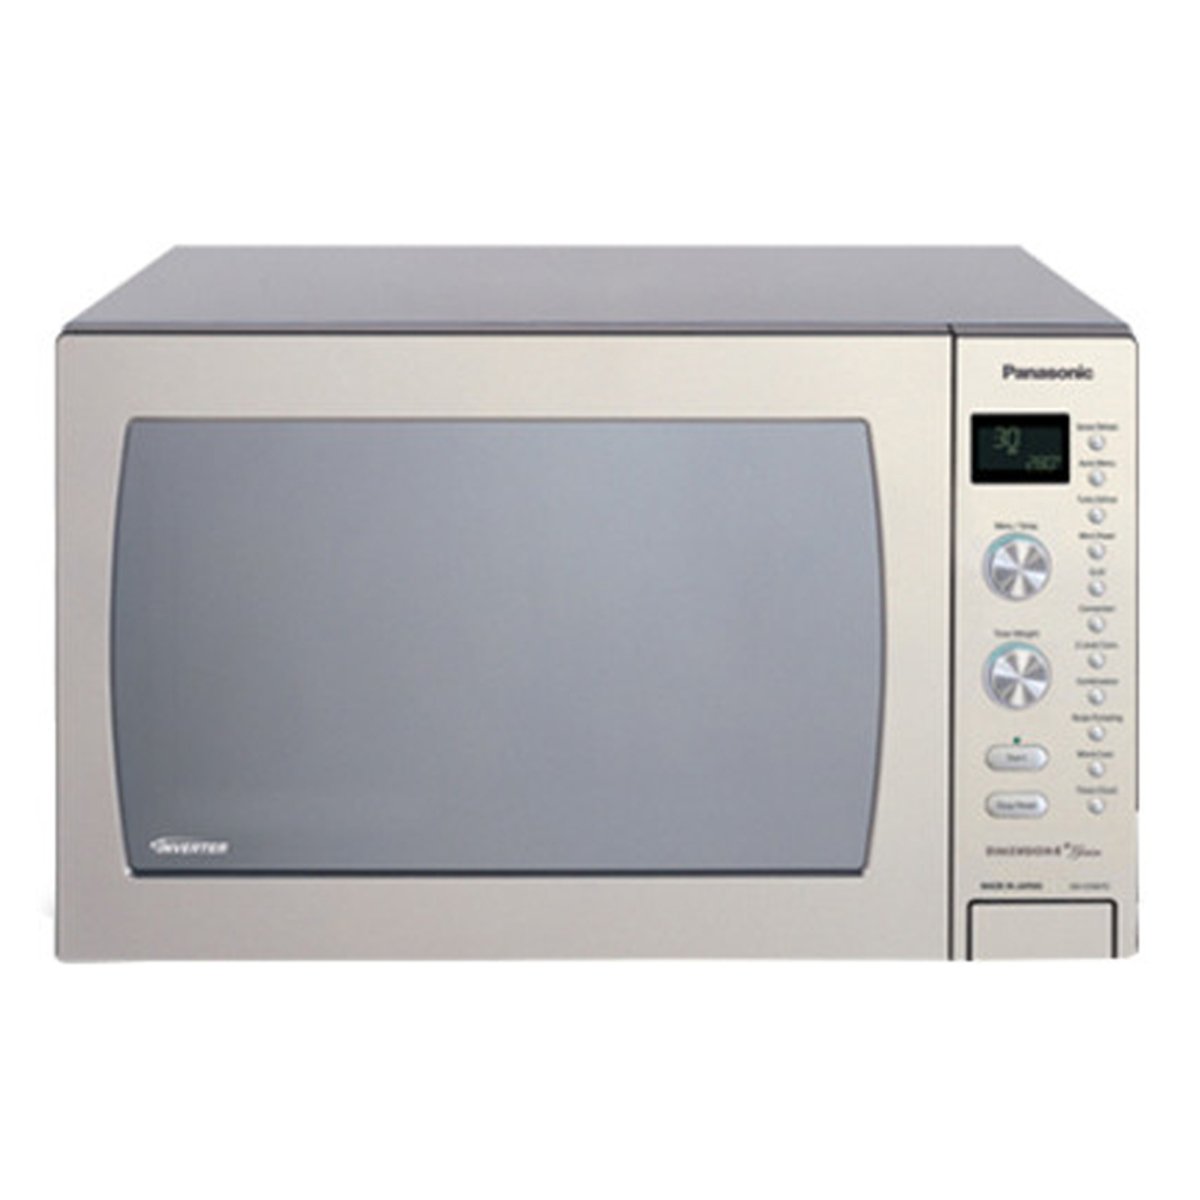 Panasonic Microwave Oven with Grill NNCD997 42Ltr